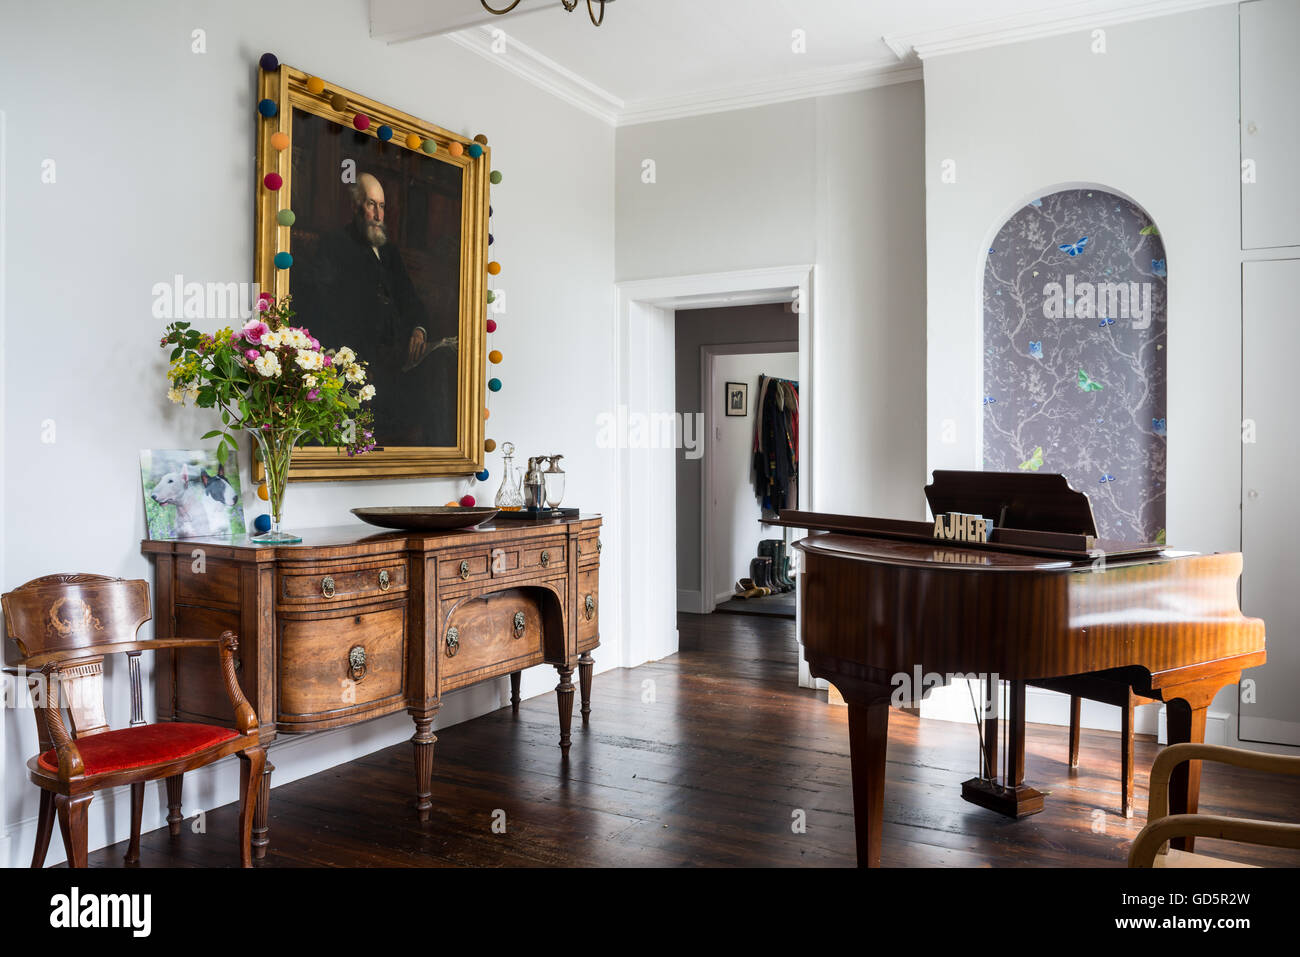 Large portrait above mahogany sideboard in hall with baby grand piano. Stock Photo